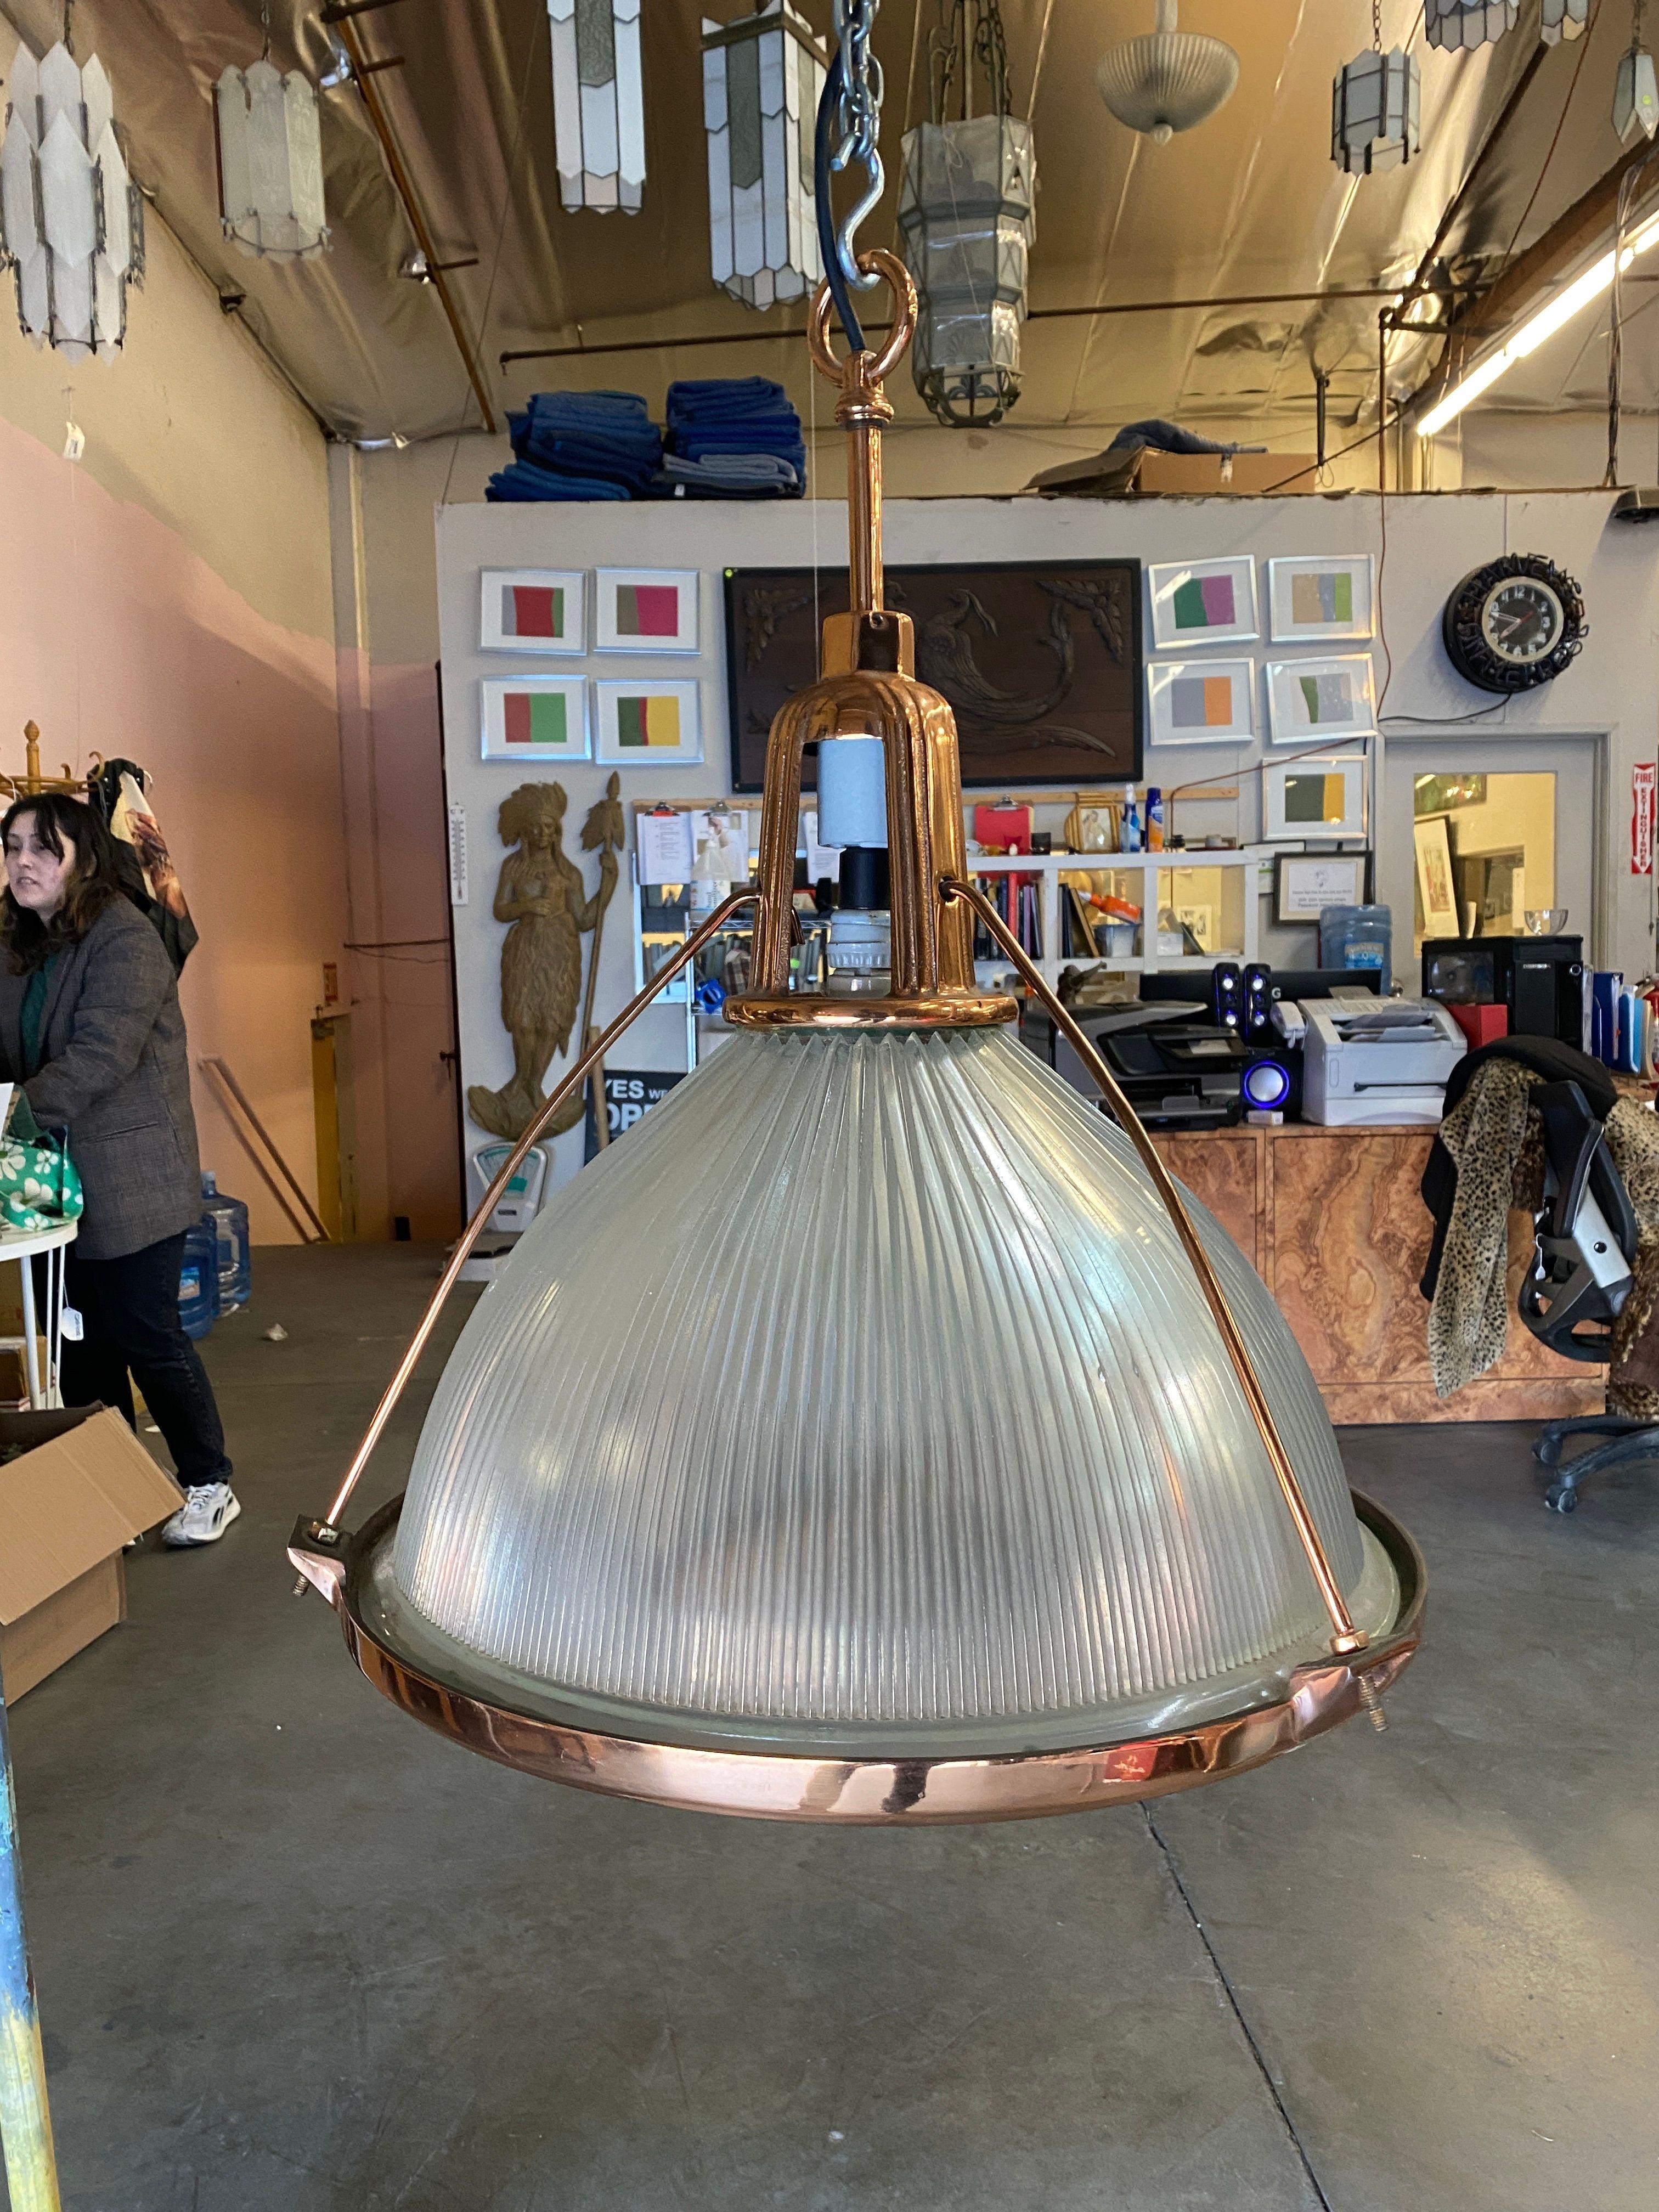 This industrial yet elegant hanging lamp from the 1940s features a Holophane glass shade. These pendant lights are connected by an aluminum casing fixed to the top of the light fixture and are a rare copper plated variant not seen often.

A